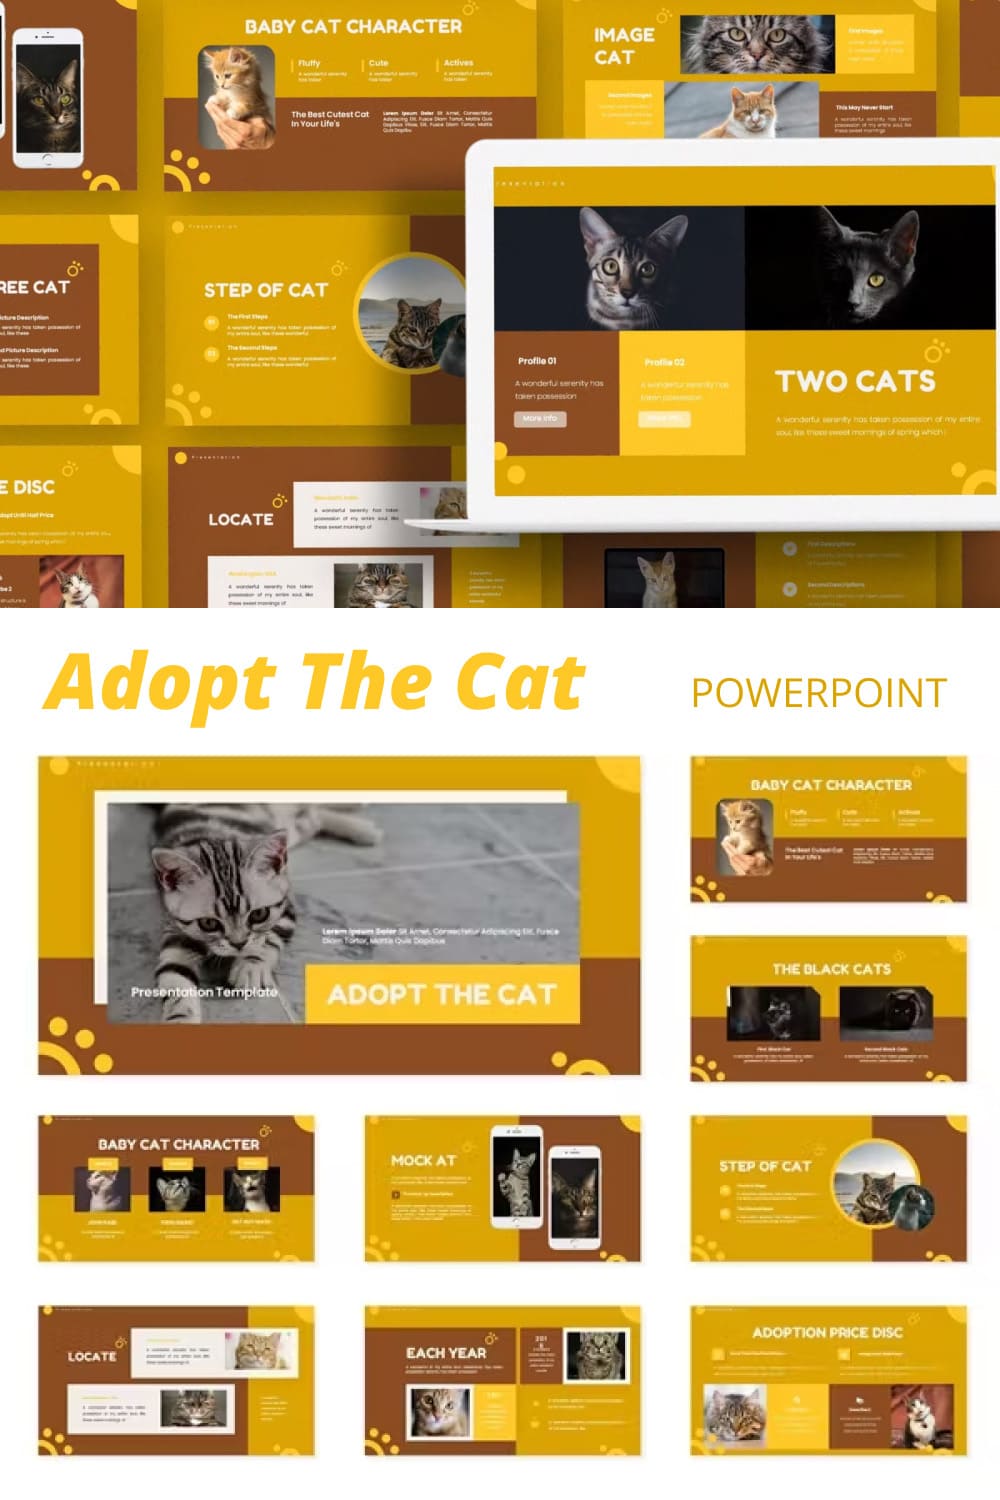 Adopt the cat powerpoint template - pinterest image preview.